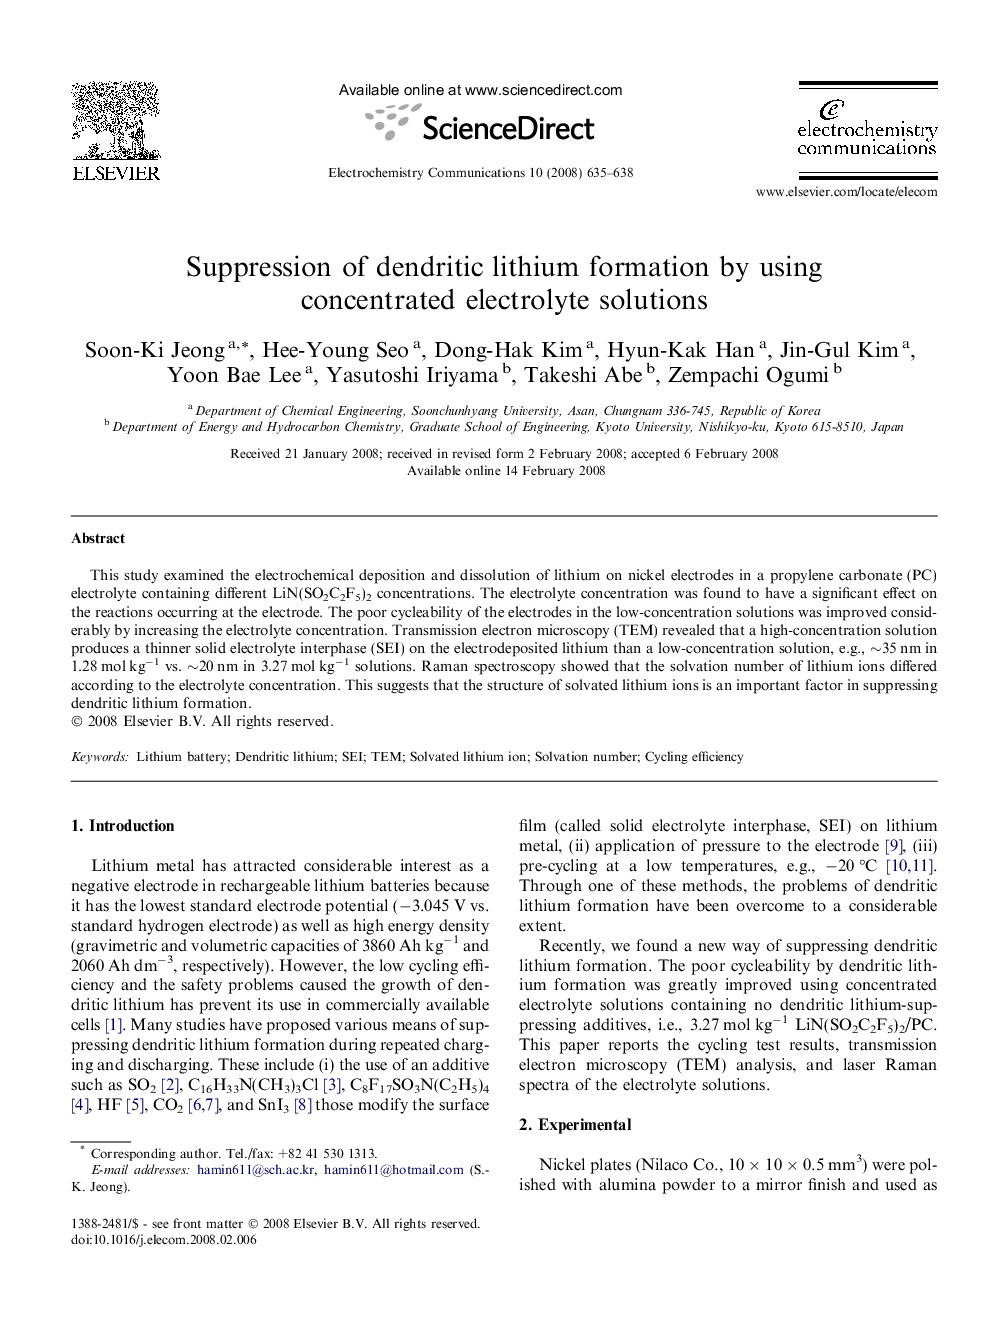 Suppression of dendritic lithium formation by using concentrated electrolyte solutions